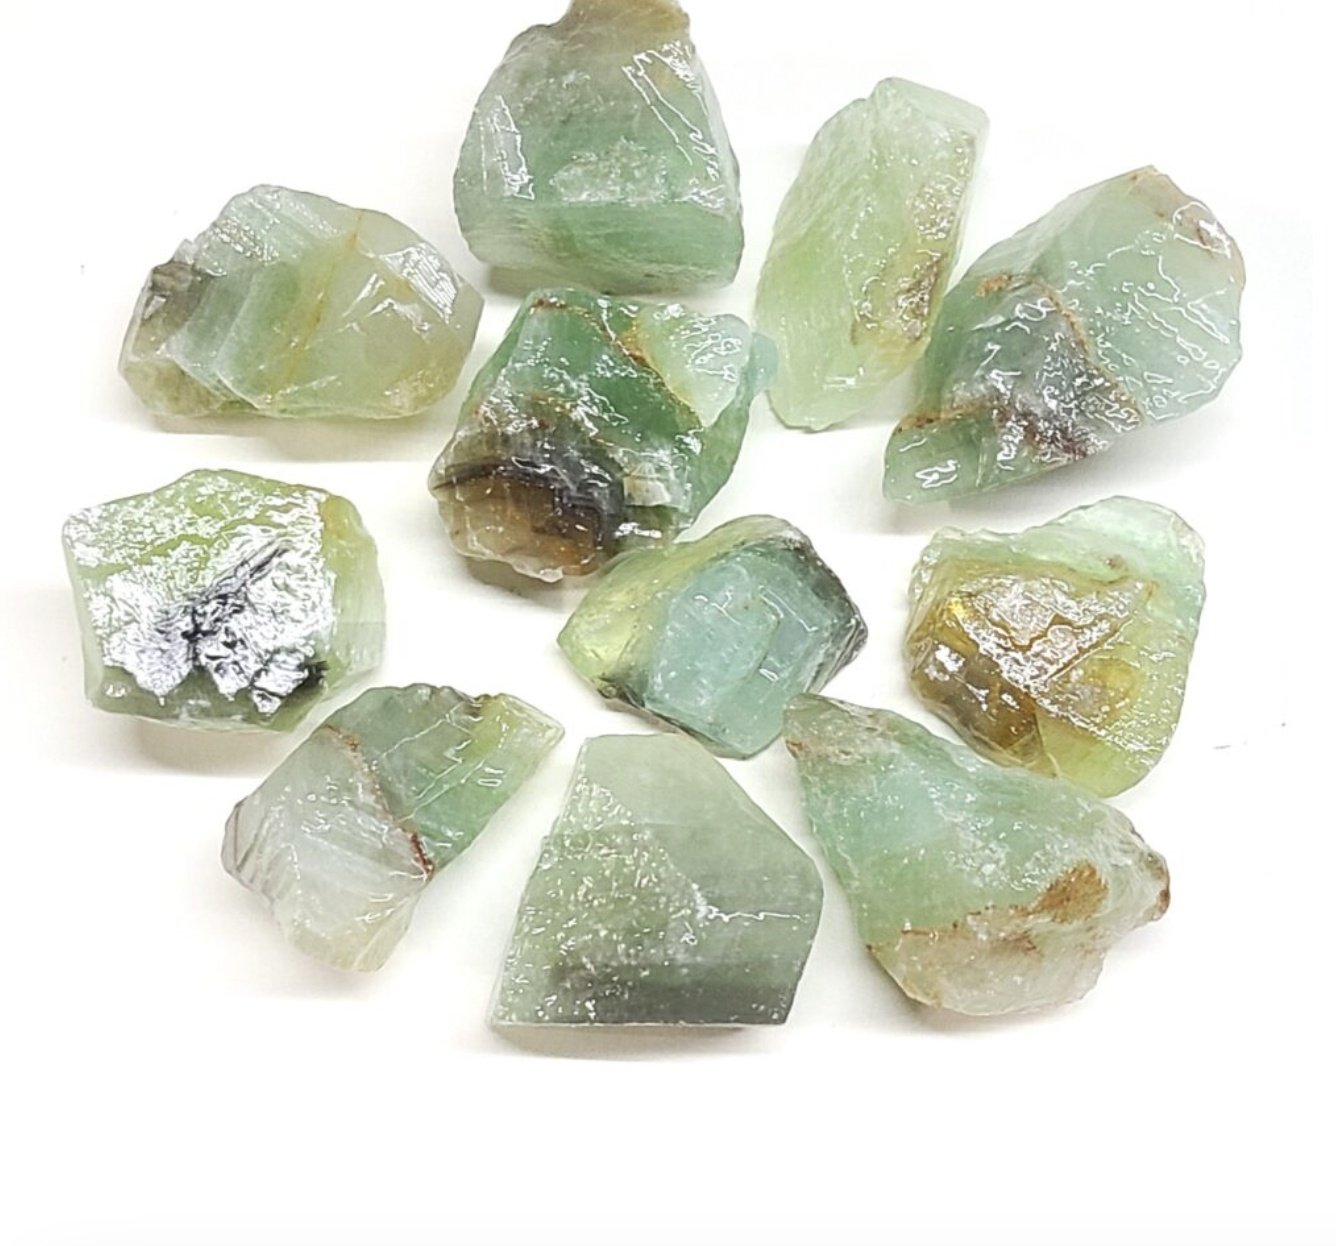 Green Calcite Rough - Sacred Crystals Rough Stones